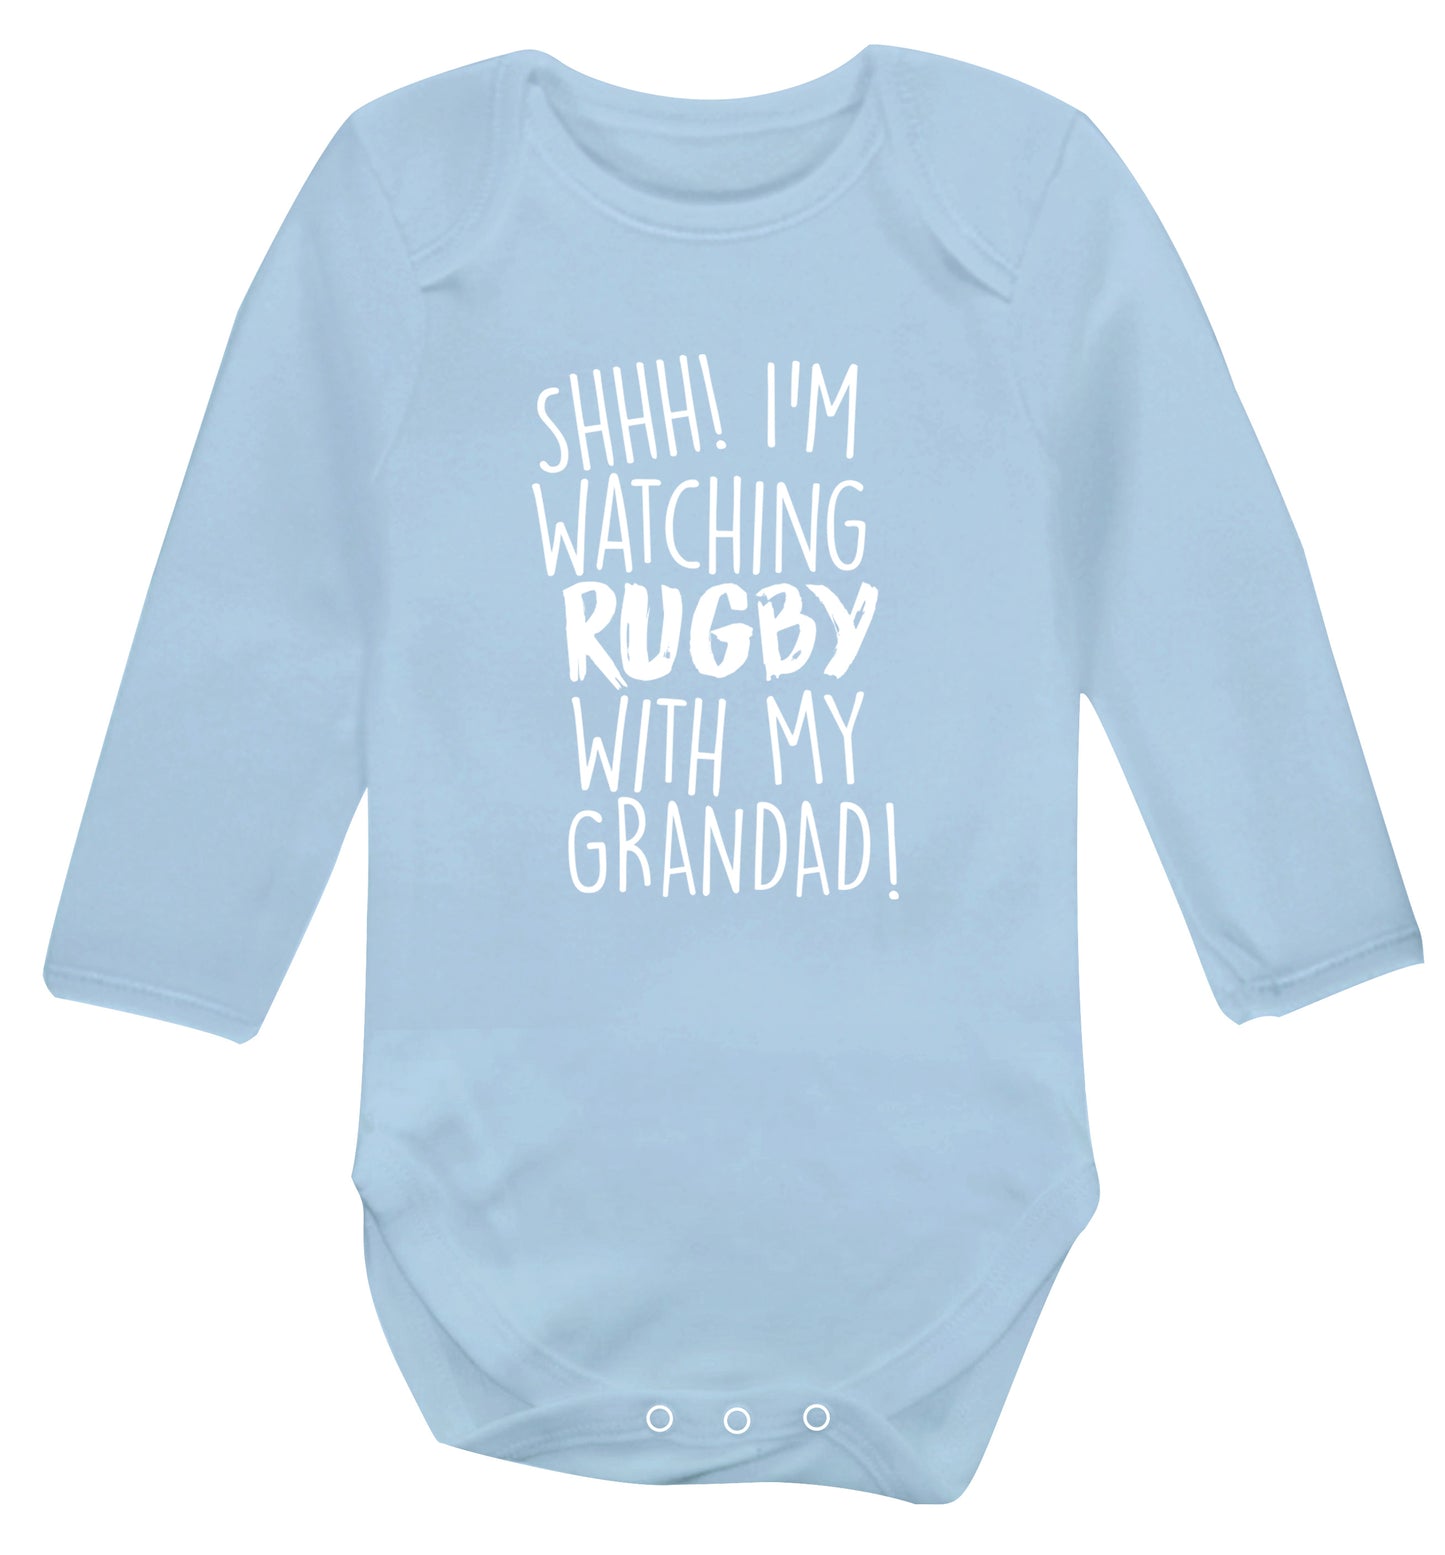 Shh I'm watching rugby with my grandaughter Baby Vest long sleeved pale blue 6-12 months